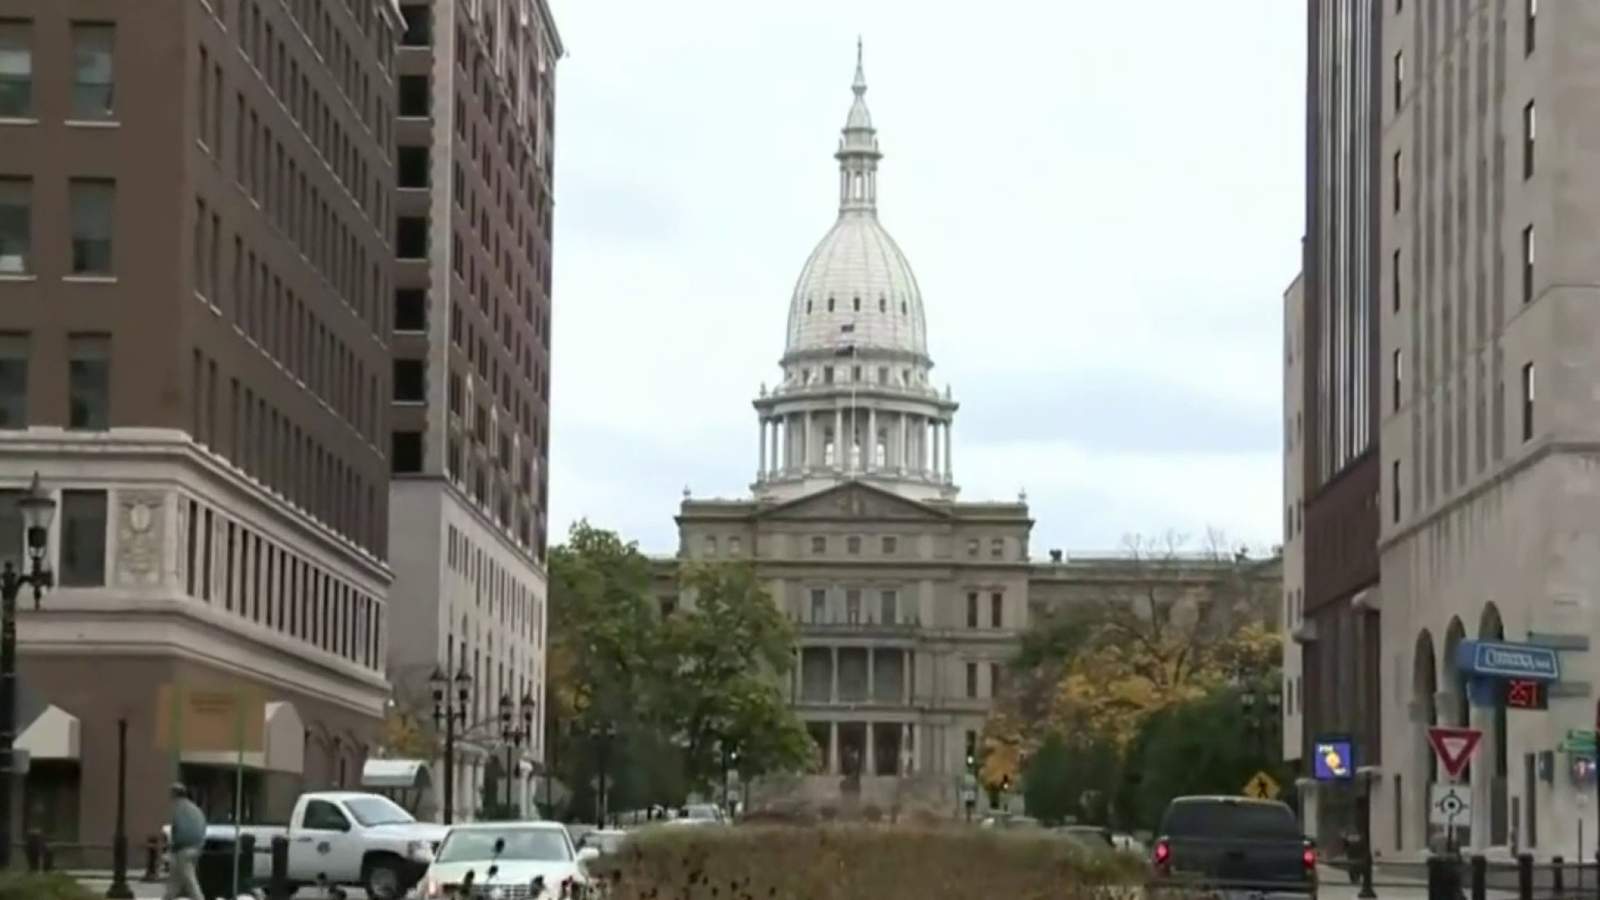 Changes coming to auto insurance rates in Michigan